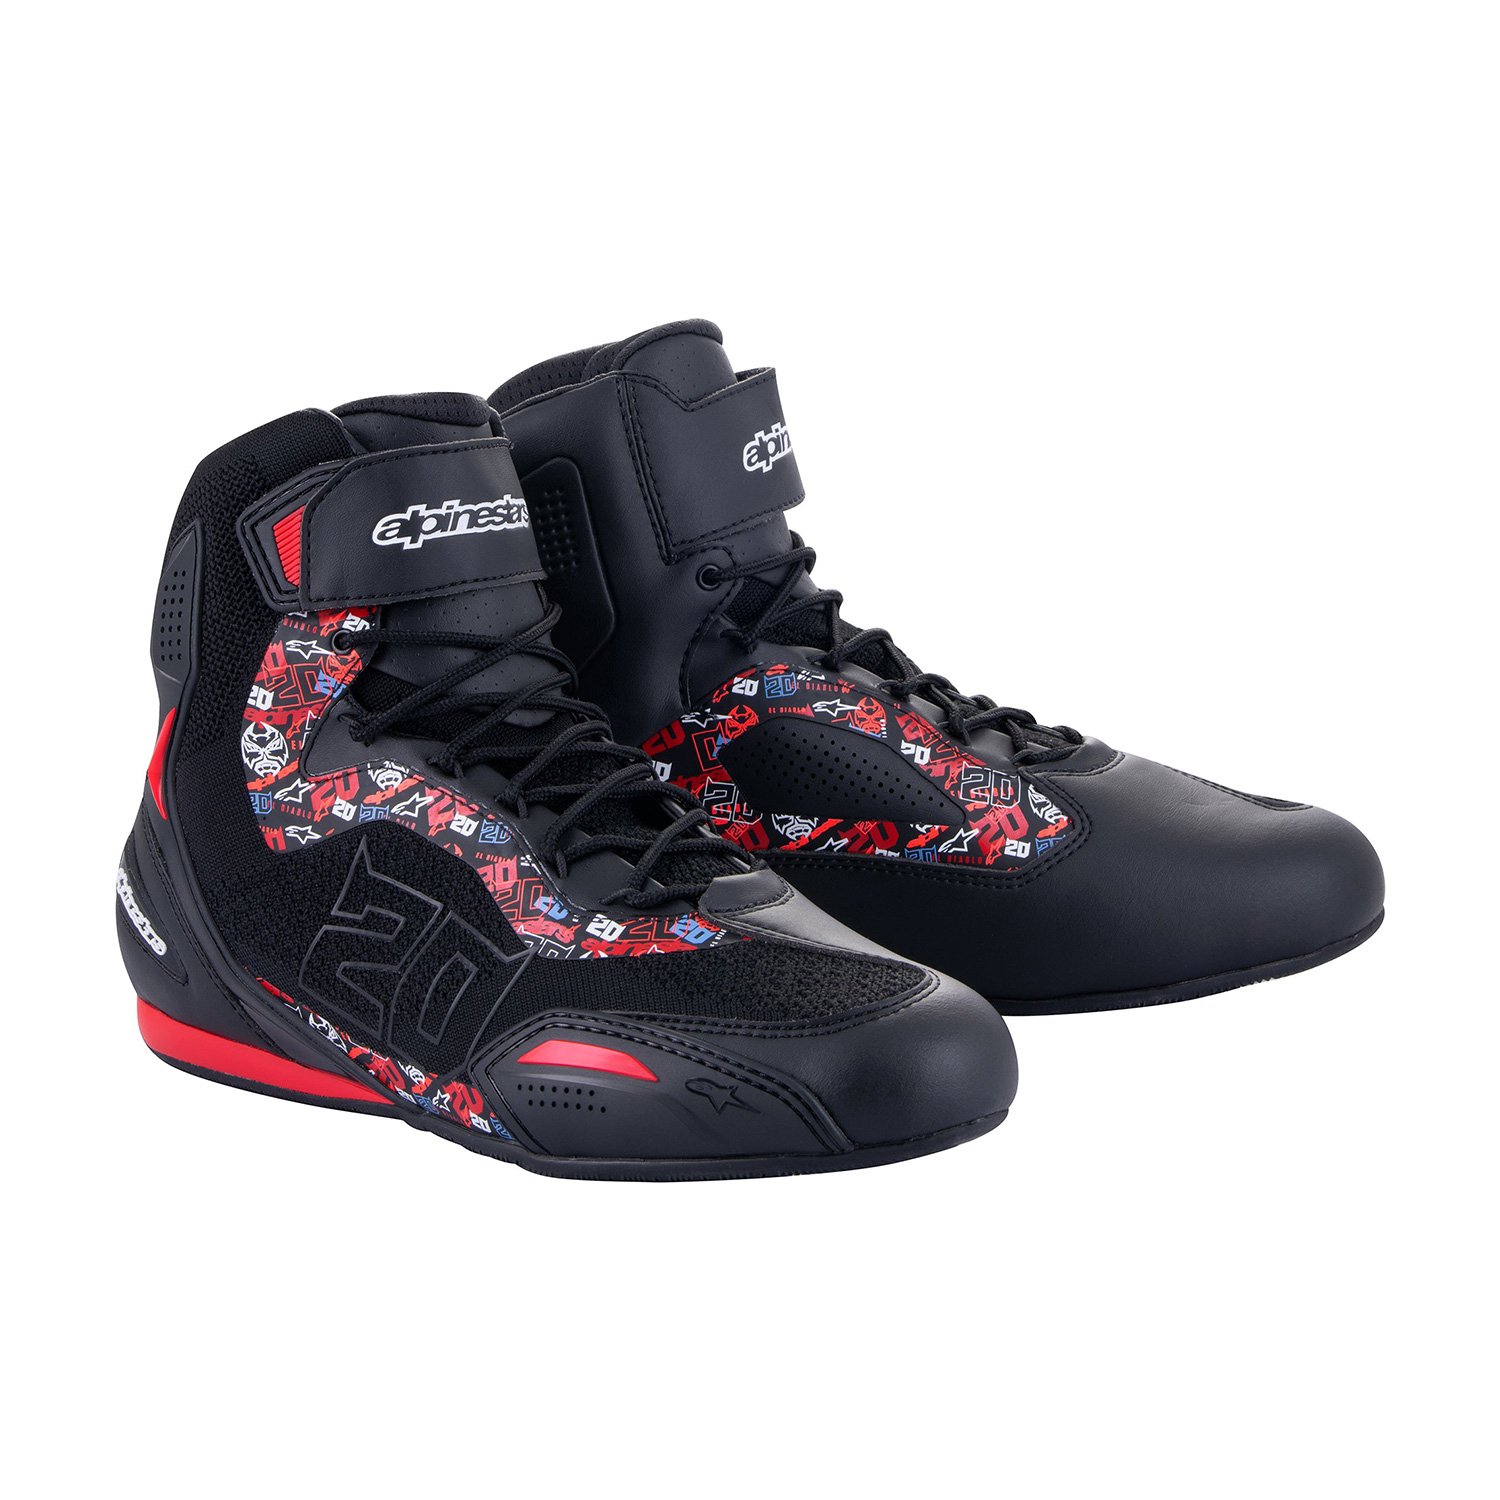 Image of EU Alpinestars FQ20 Faster-3 Rideknit Noir Bright Rouge Chaussures Taille US 13